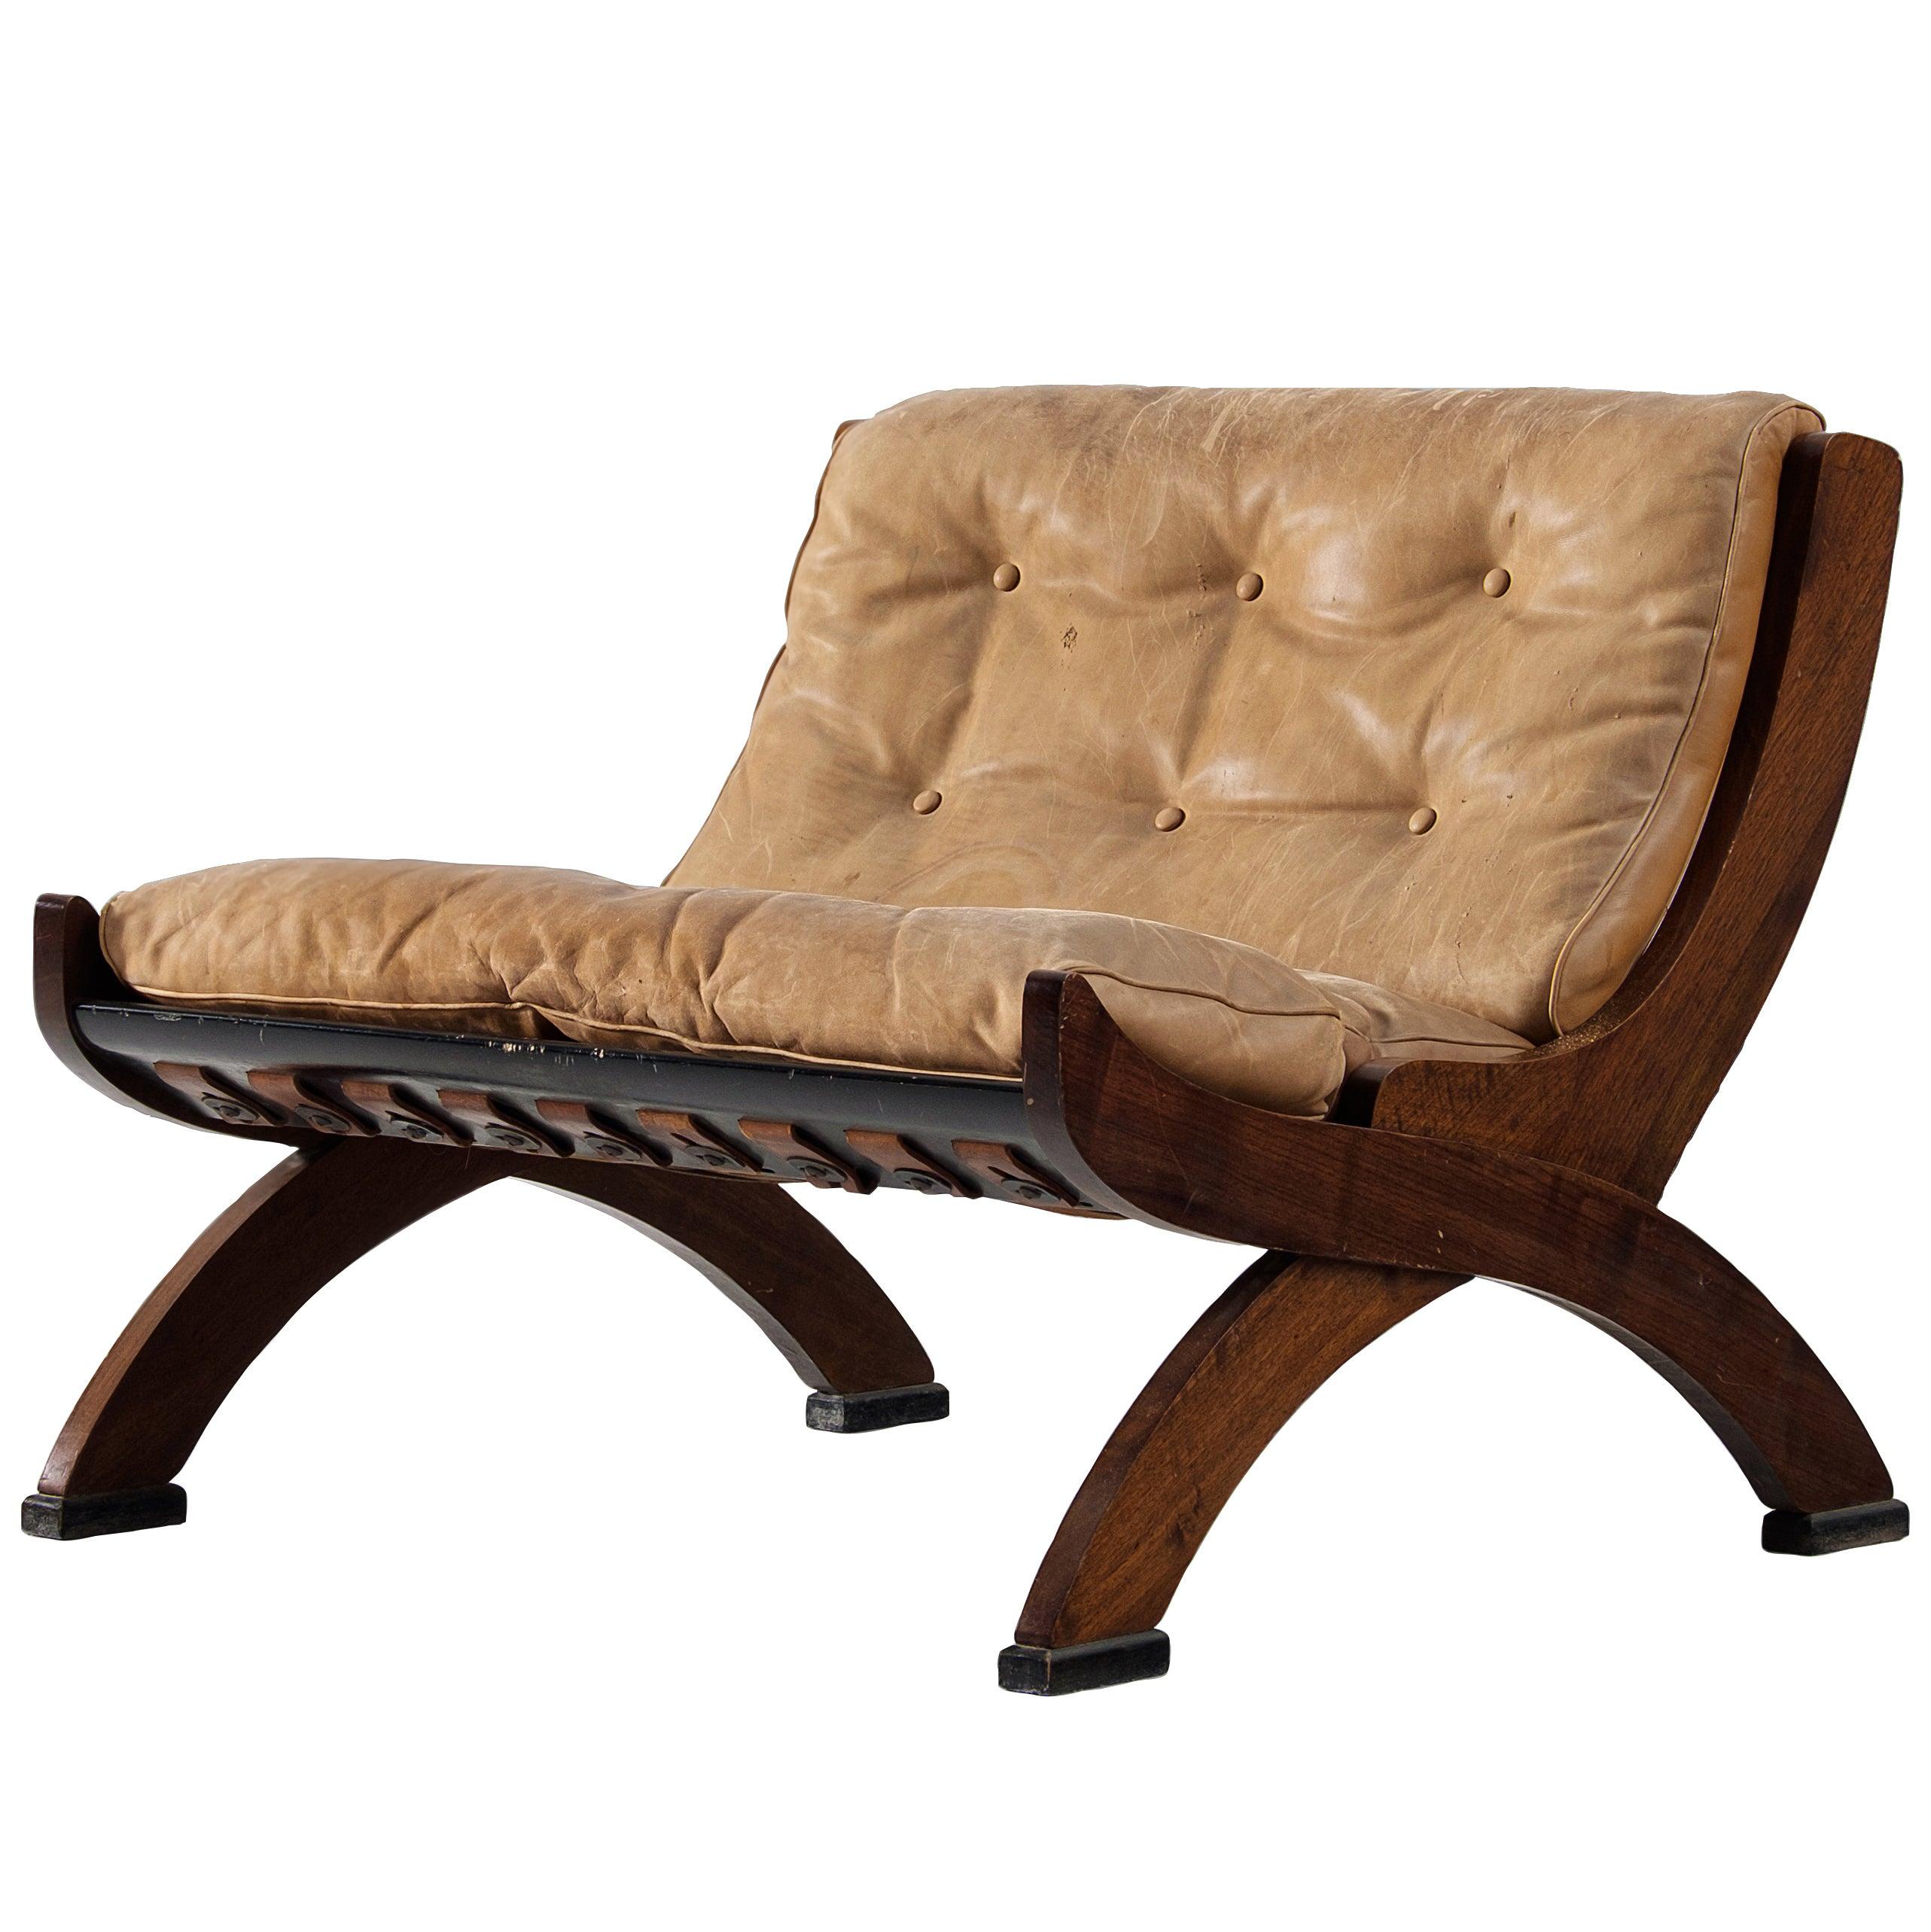 Marco Comolli Lounge Chair in Walnut and Beige Leather 